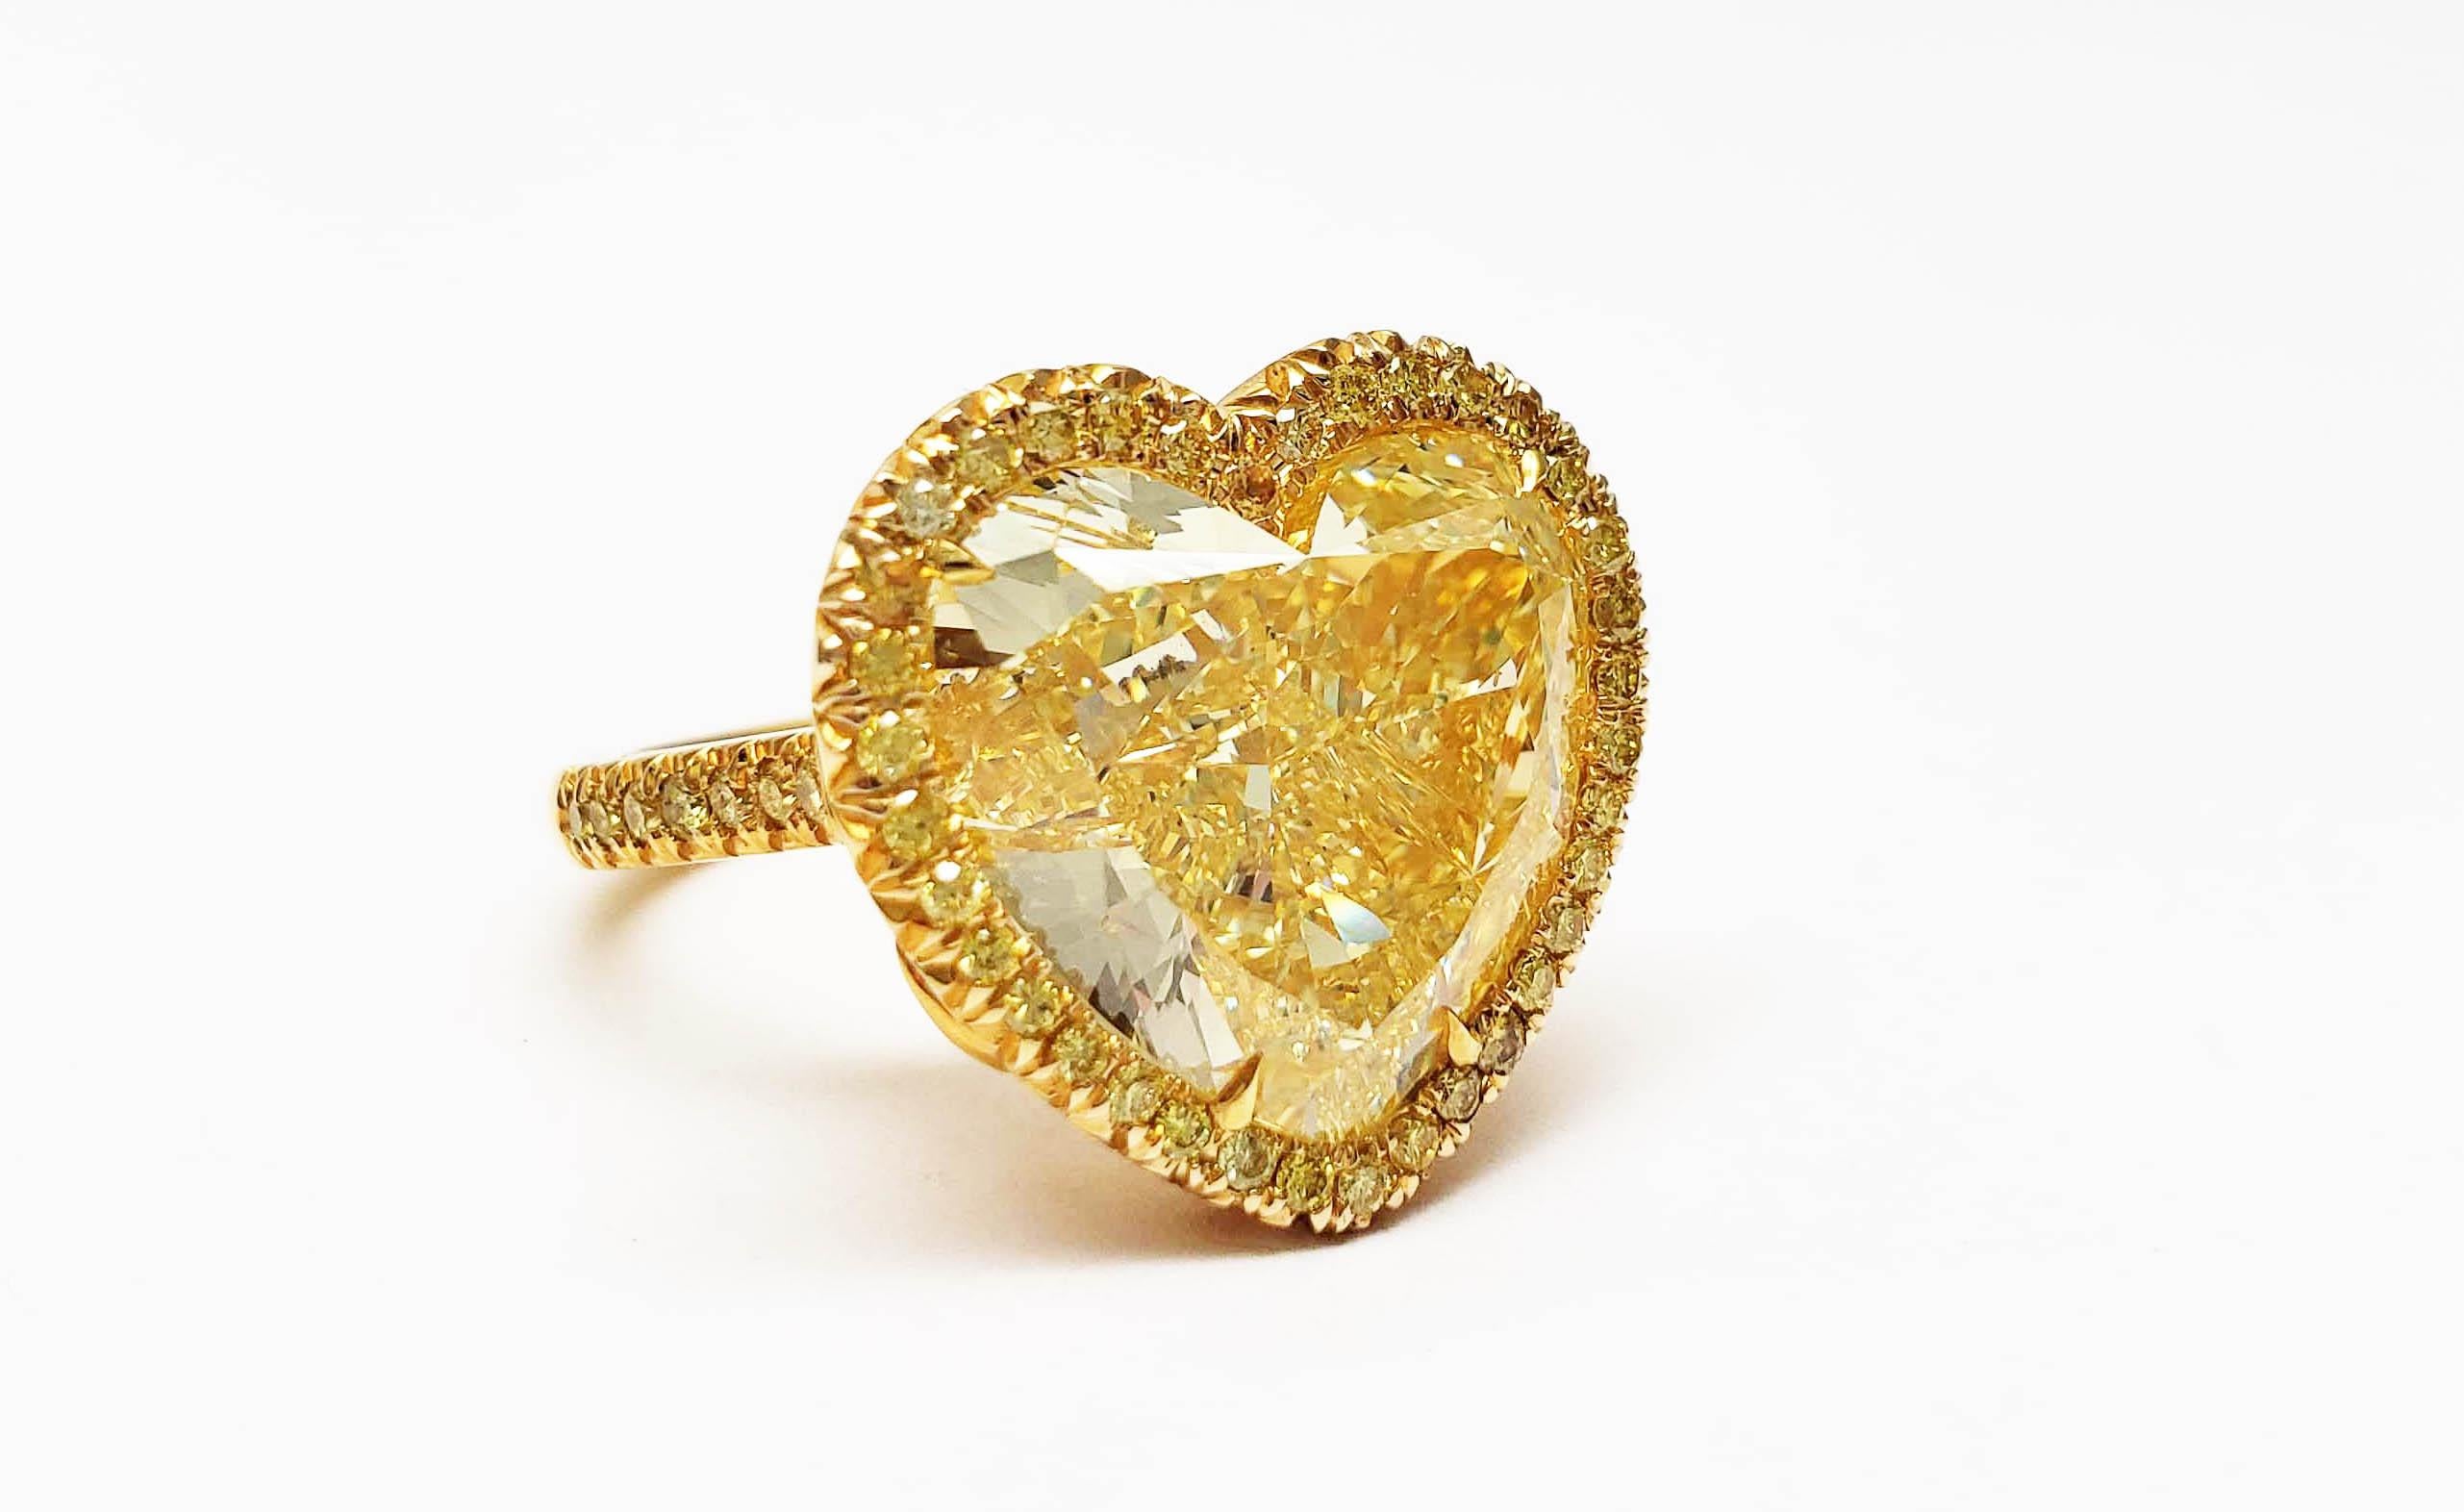 From SCARSELLI this ring has a Huge Sunny Heart.  This 12.20 carat Fancy Intense Yellow Heart shape diamond (GIA graded VS1 ) is  surrounded by Yellow diamonds in an 18 karat Yellow gold hand made ring. The presentation of this diamond is large and